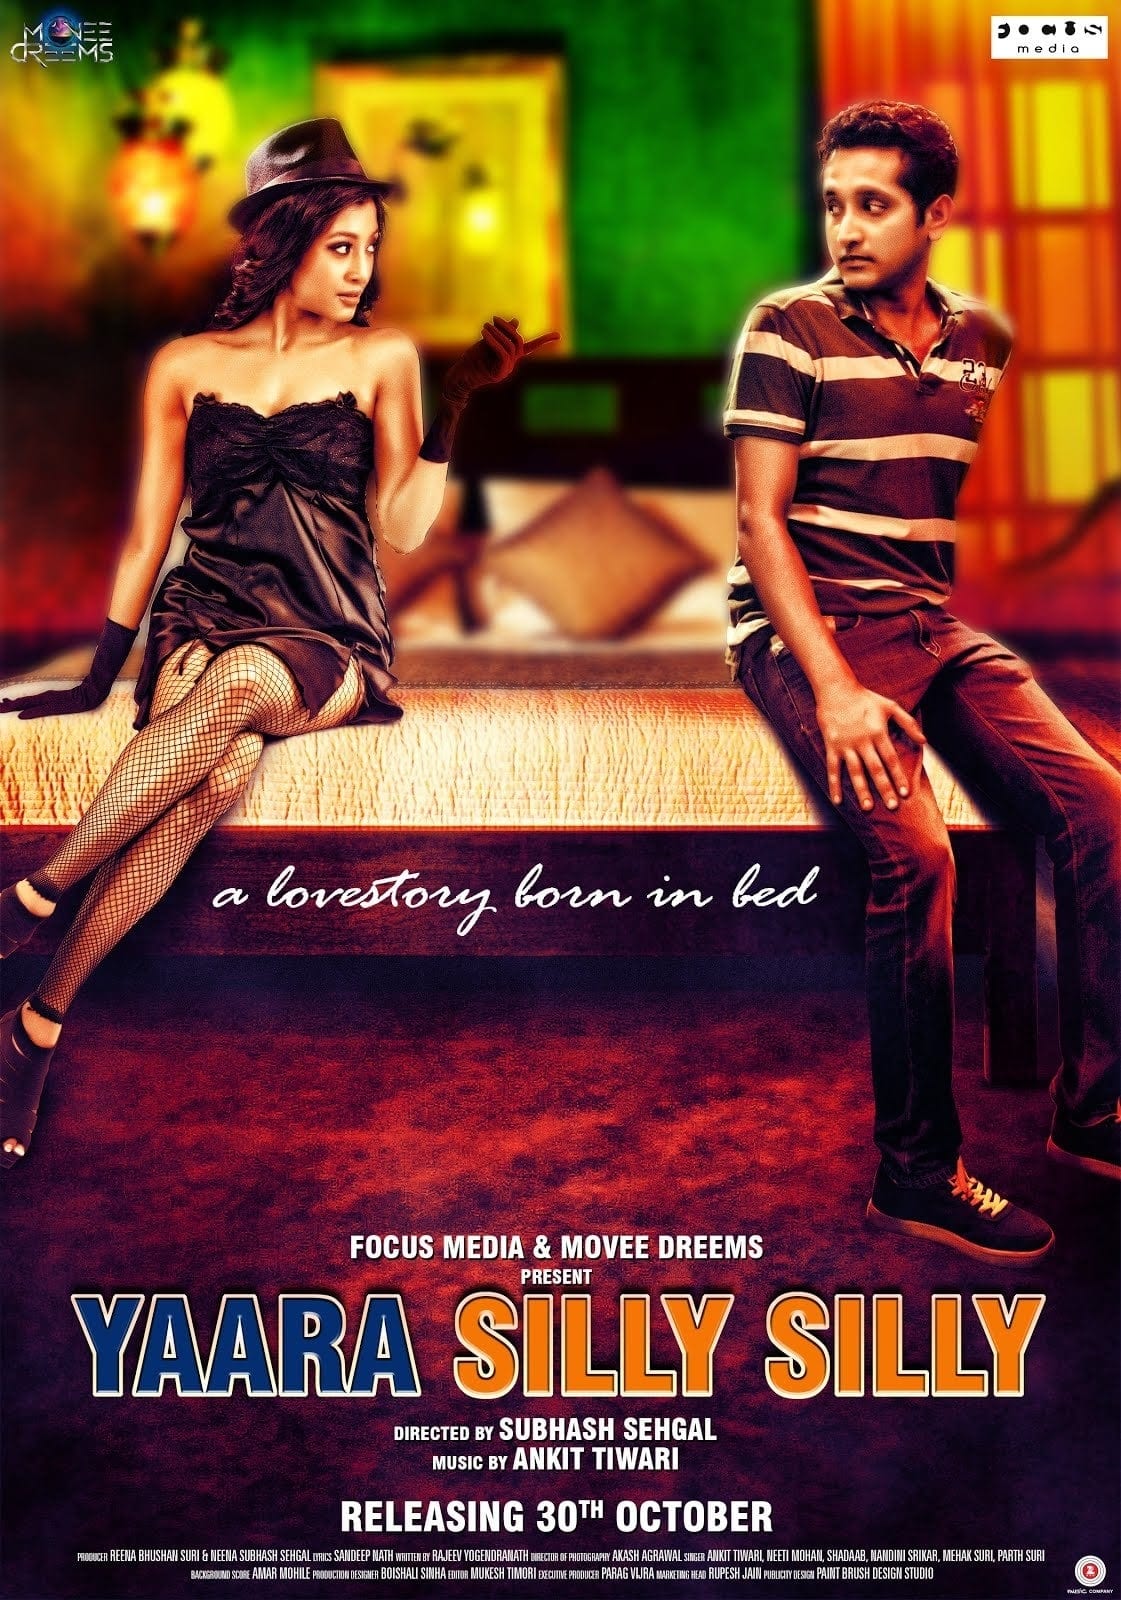 Poster for the movie "Yaara Silly Silly"